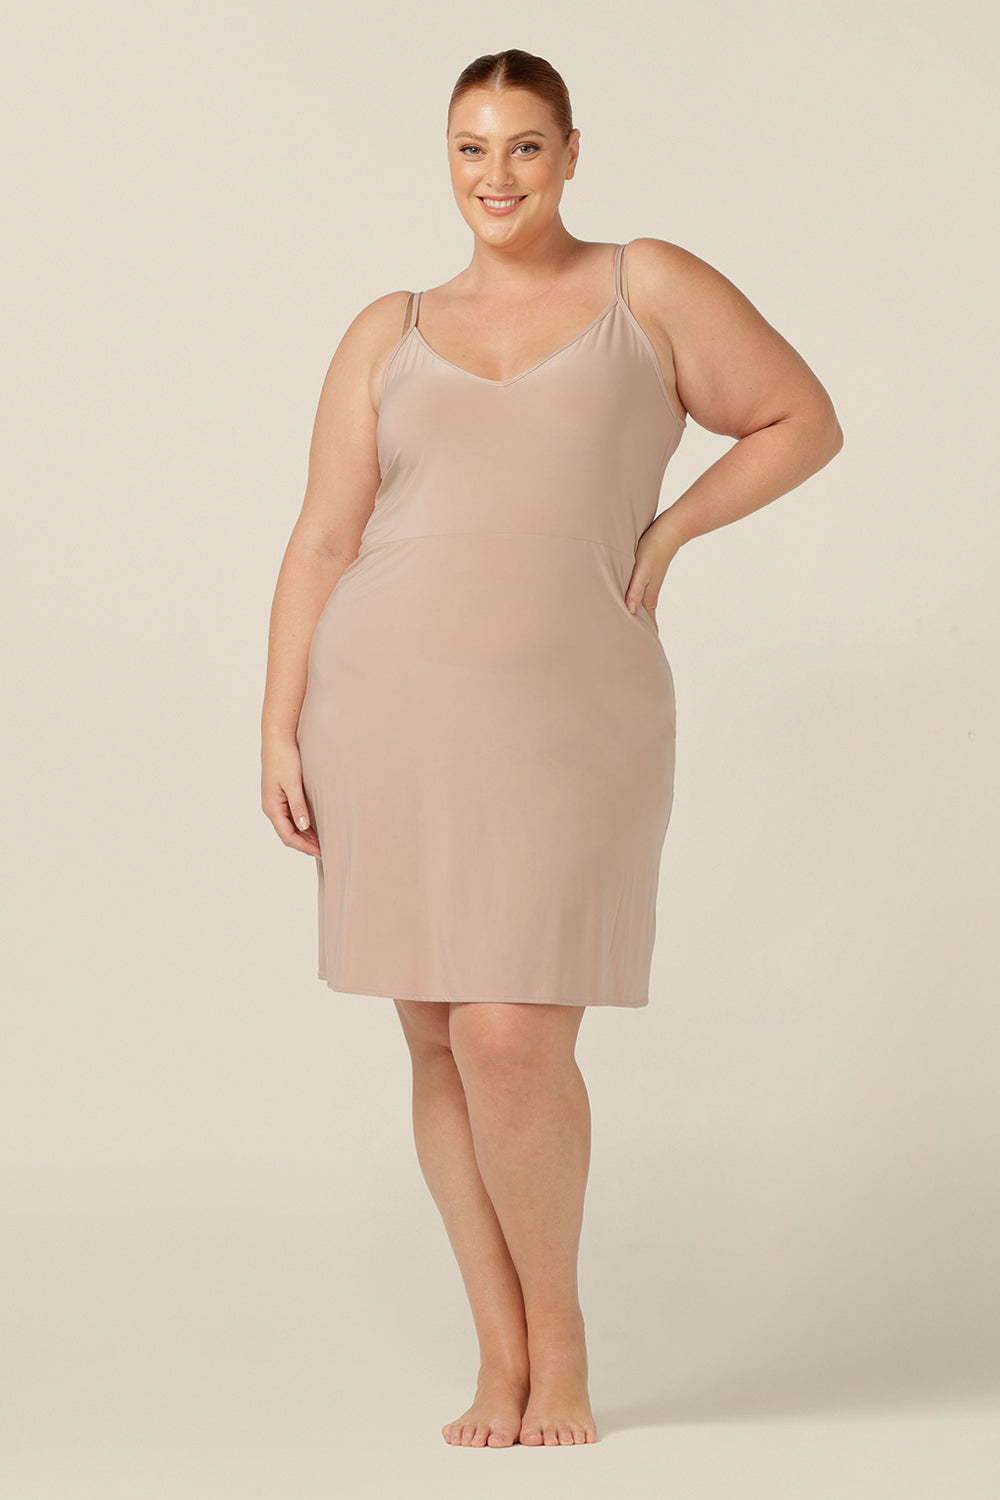 plus size, size 18 woman wears a nude, mini-length slip. A reversible slip, this flesh coloured under garment can have a V-neck or a scoop neck to give a smooth layer under dresses and skirts. Great for wearing around the house as loungewear - Australian womens fashion